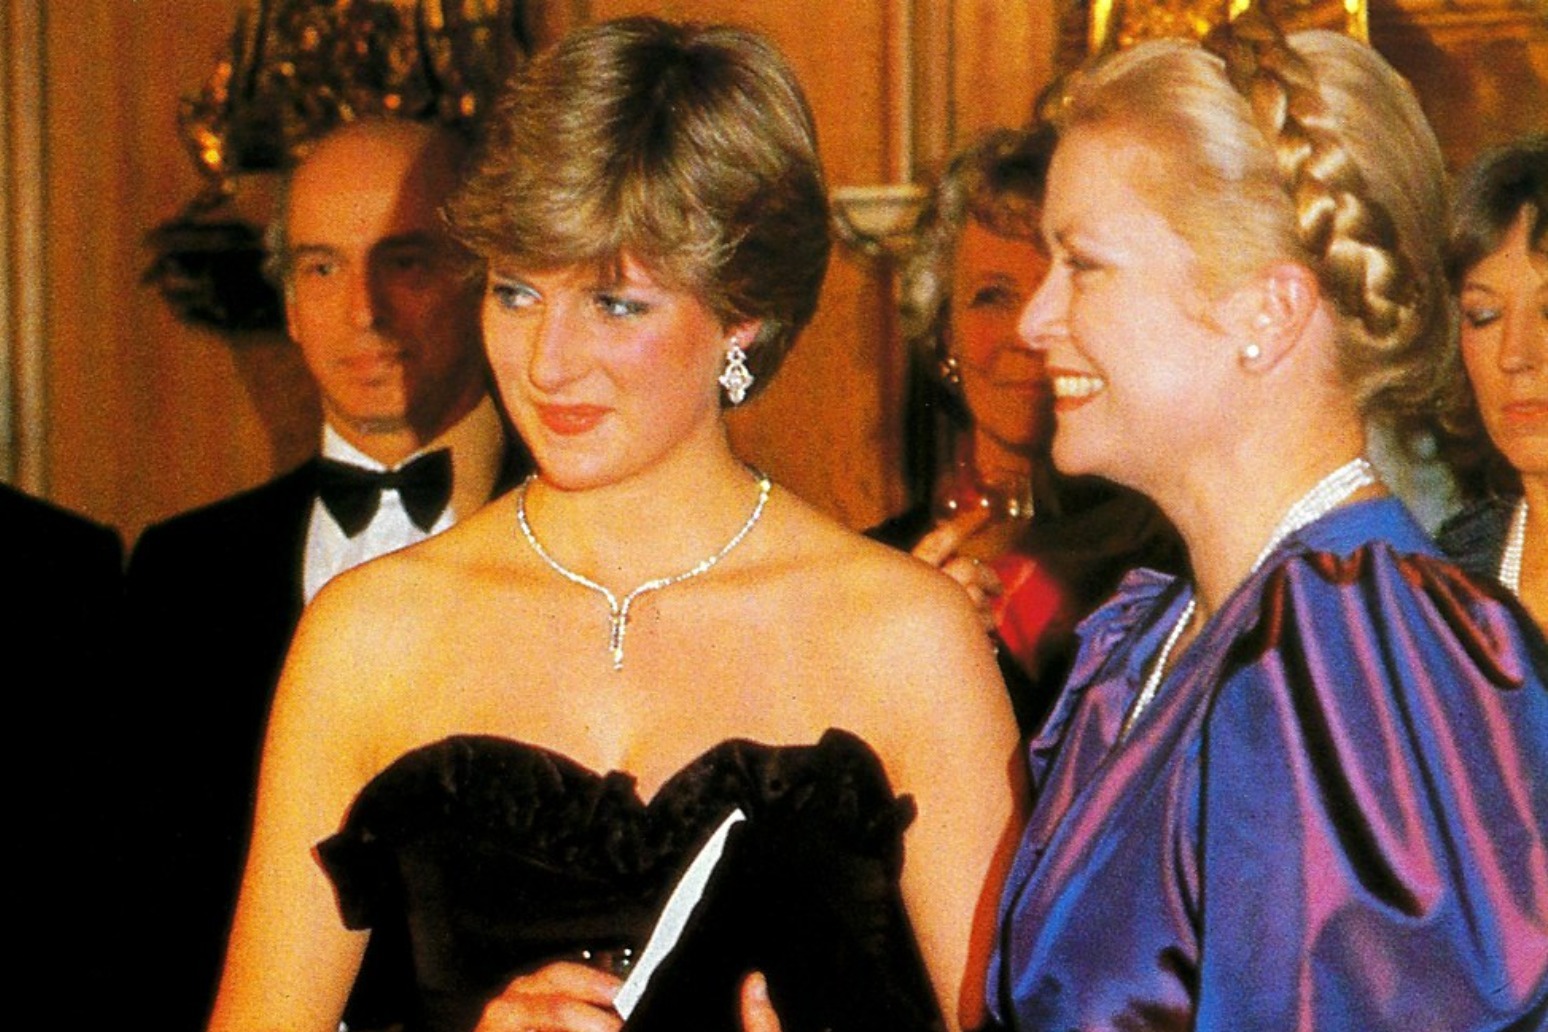 Police investigations into Diana’s death to be explored in Channel 4 documentary 